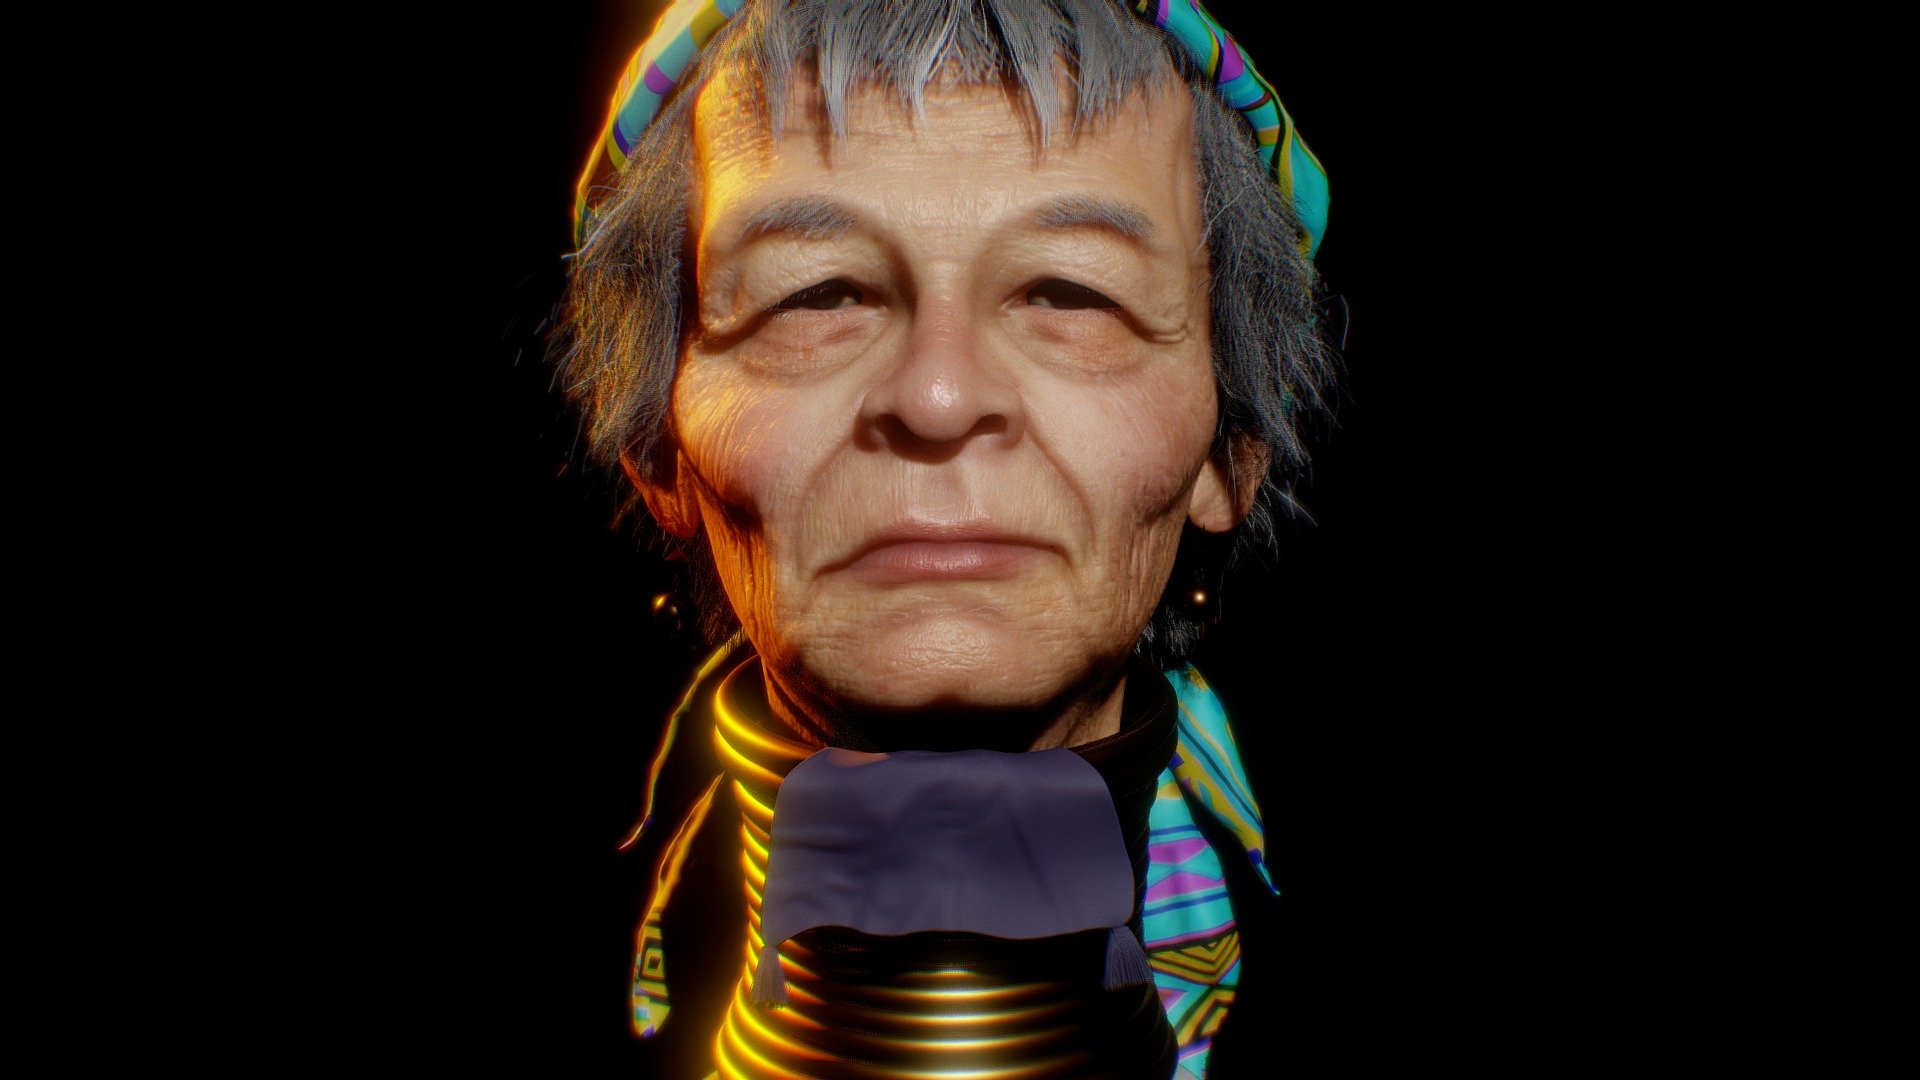 A model i made these past few days.
I've always found interesting tribal portraits so i thought i'd give it a go ;)
Modeling in Blender 2.80.
Textures made in zbrush and Photoshop.
Sculpting in Zbrush 3d model